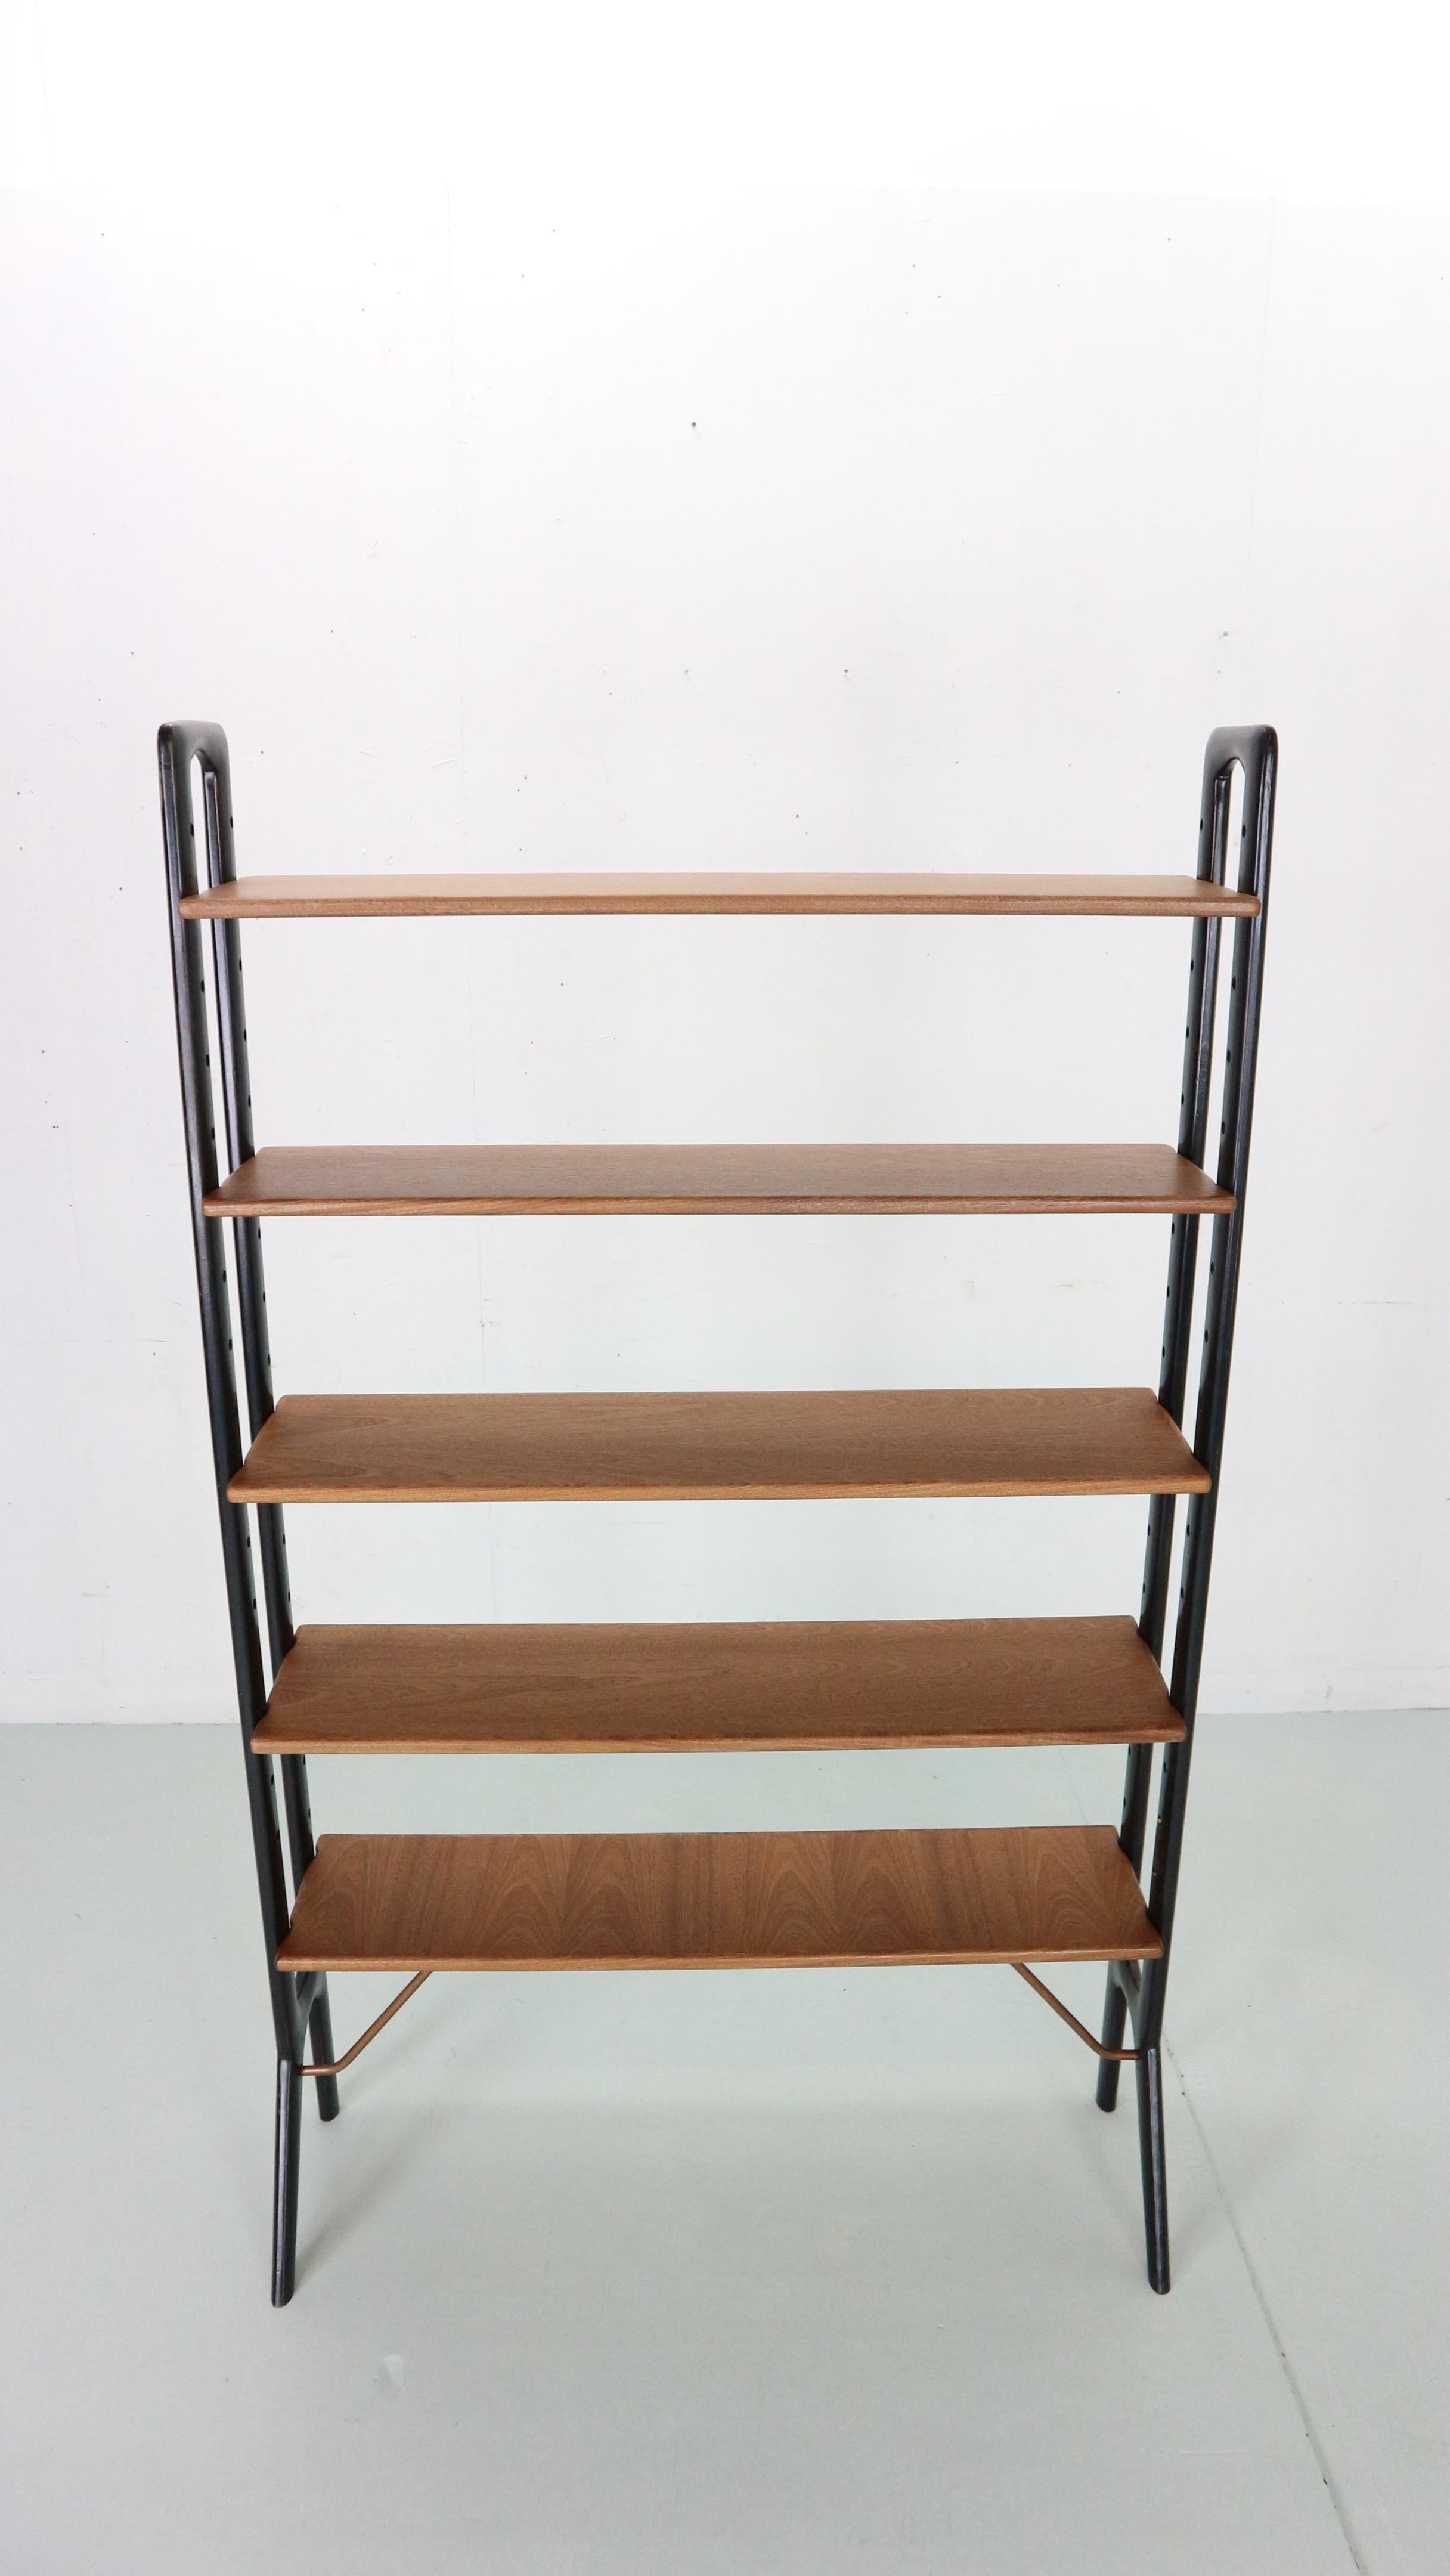 Scandinavian modern period free standing bookshelf or room divider designed by Kurt Østervig for K.P. Møbler makers in 1960's Denmark.
High quality danish furniture shelving unit made of teak wood with brass support structure ( witch has been